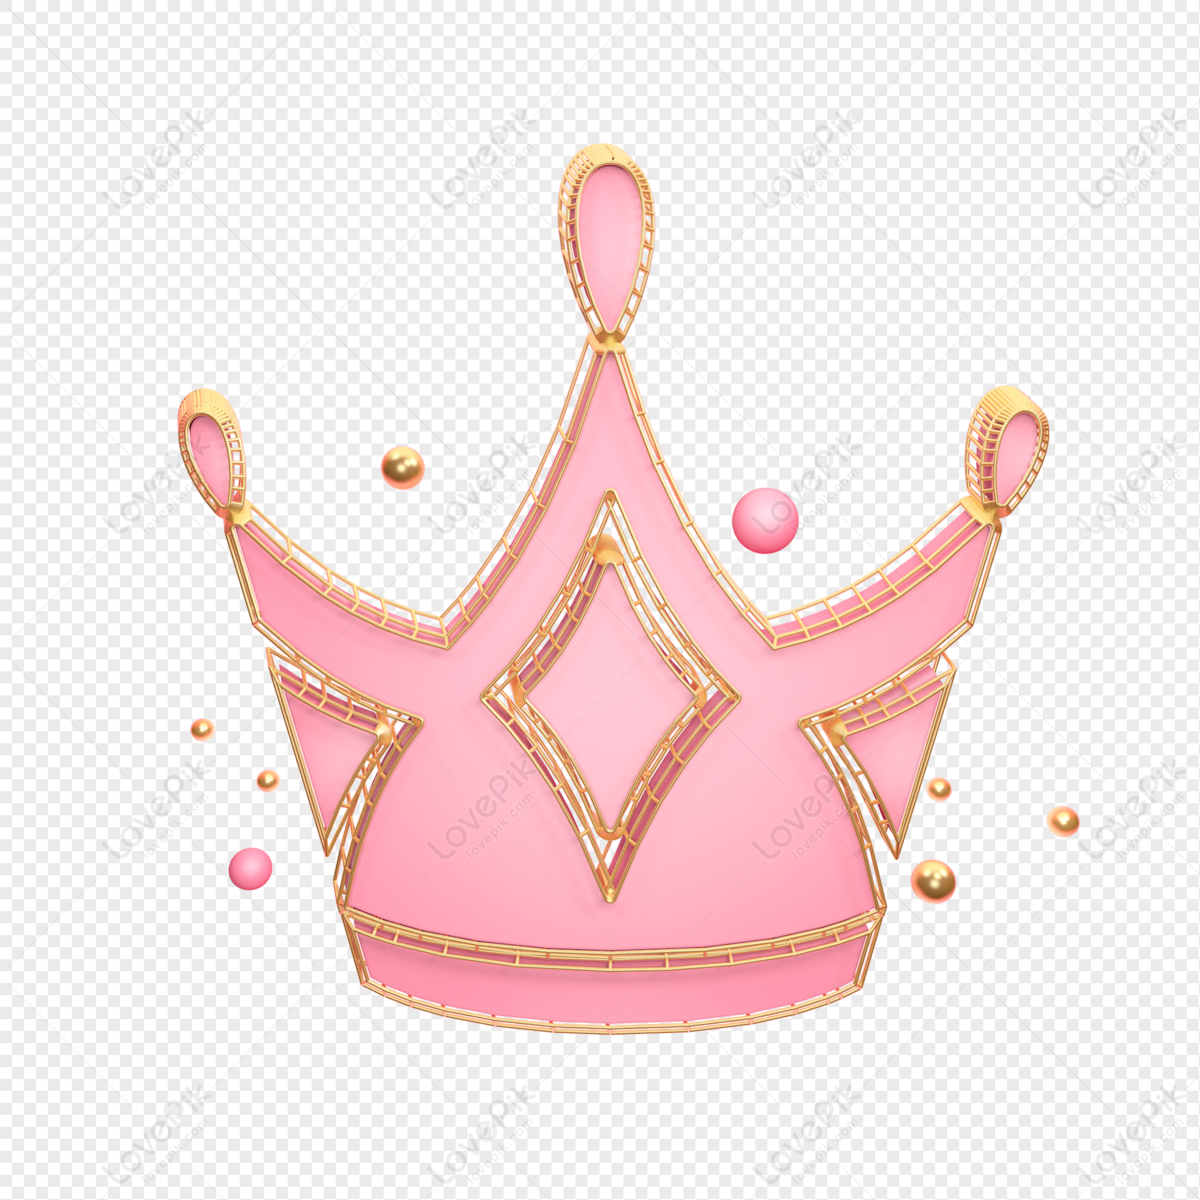 pink crowns background